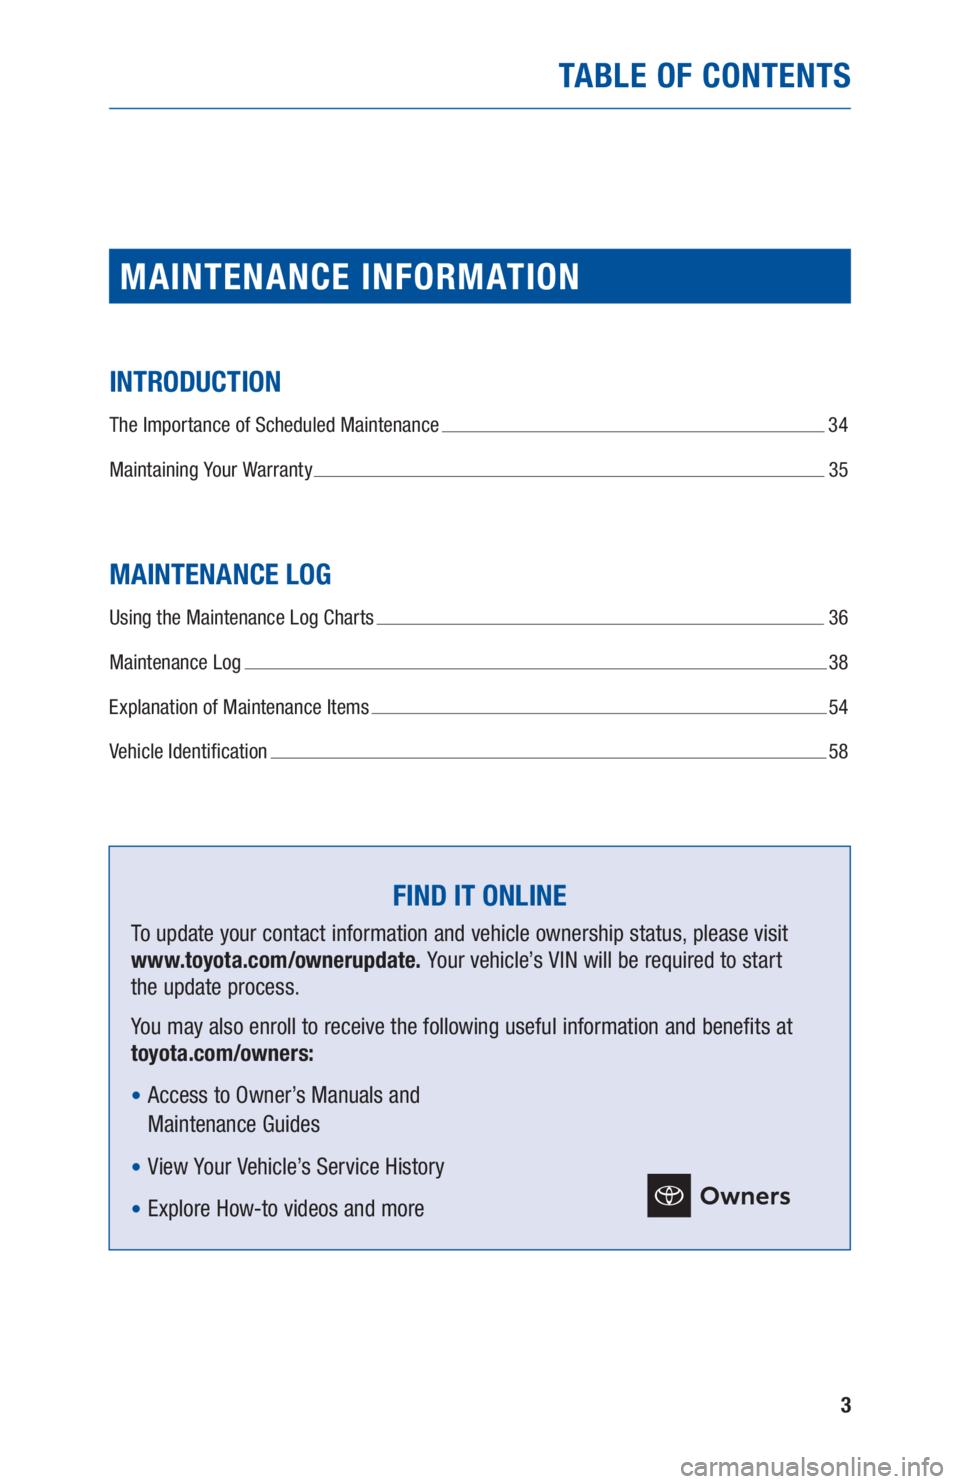 TOYOTA AVALON 2020  Warranties & Maintenance Guides (in English) 3
TABLE OF CONTENTS
MAINTENANCE INFORMATION
INTRODUCTION
The Importance of Scheduled Maintenance  34
Maintaining Your Warranty 
 35
MAINTENANCE LOG
Using the Maintenance Log Charts  36
Maintenance Log